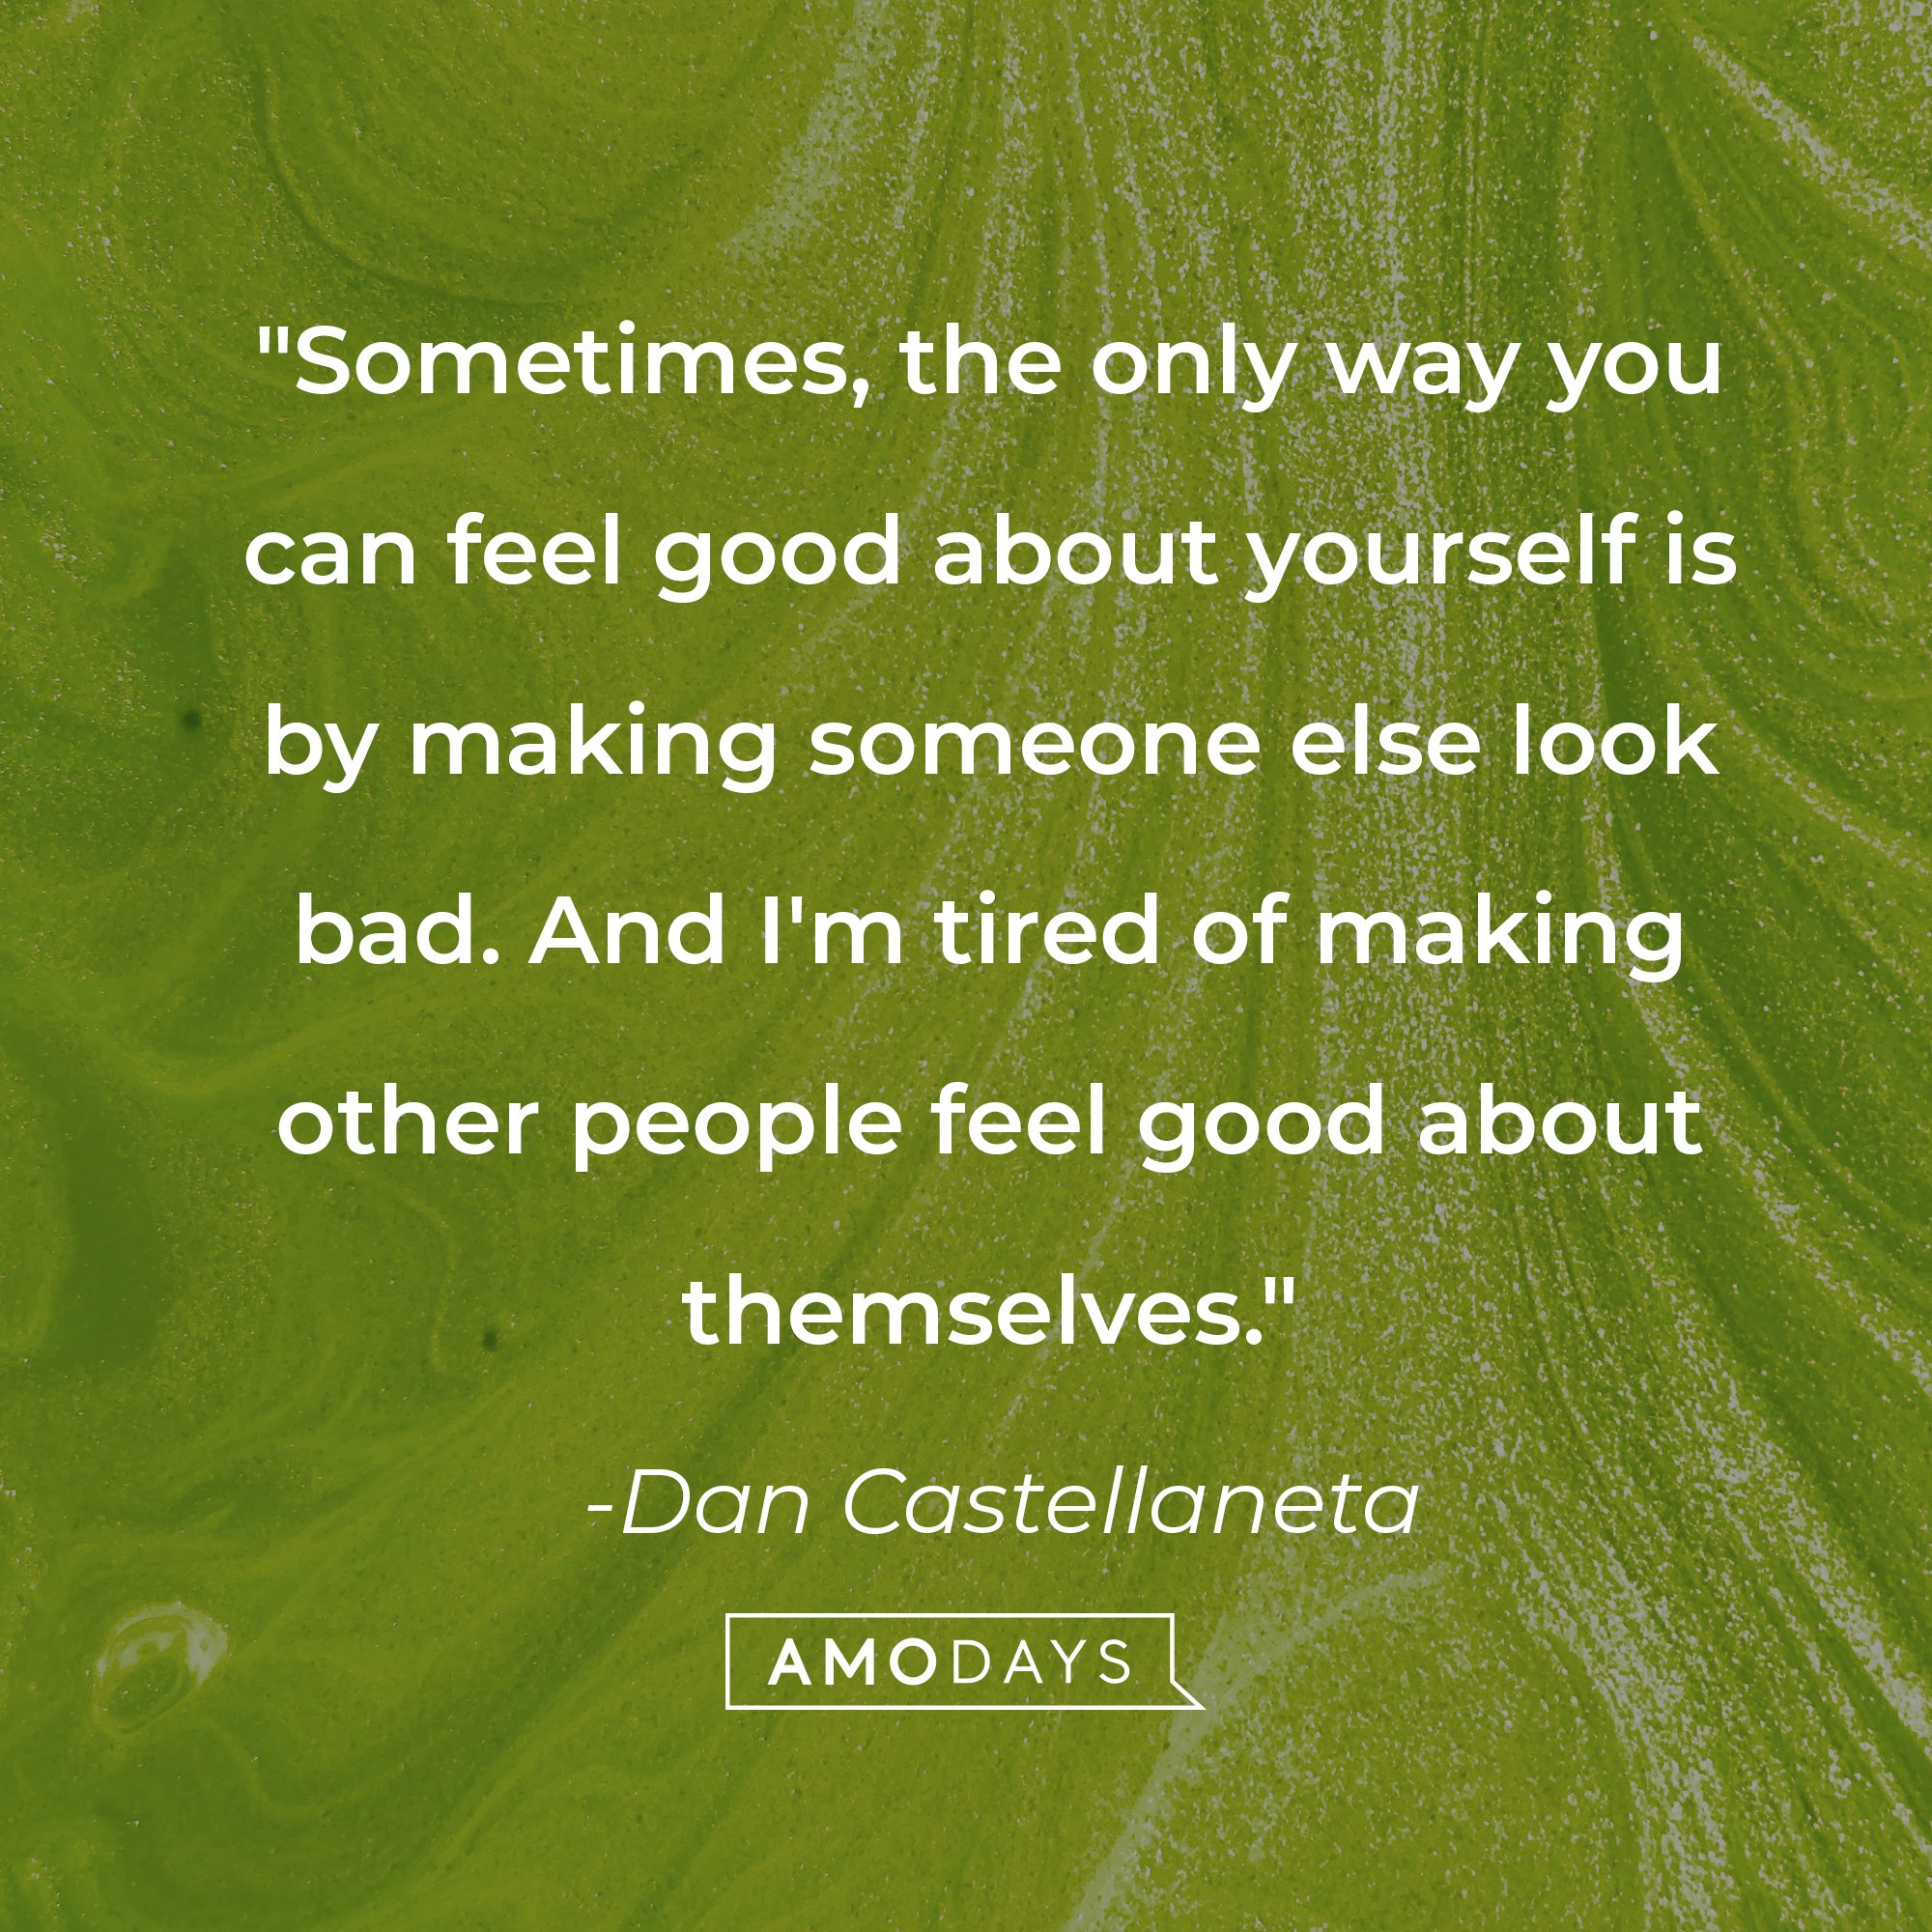 Dan Castellaneta's quote: "Sometimes, the only way you can feel good about yourself is by making someone else look bad. And I'm tired of making other people feel good about themselves." | Source: AmoDays